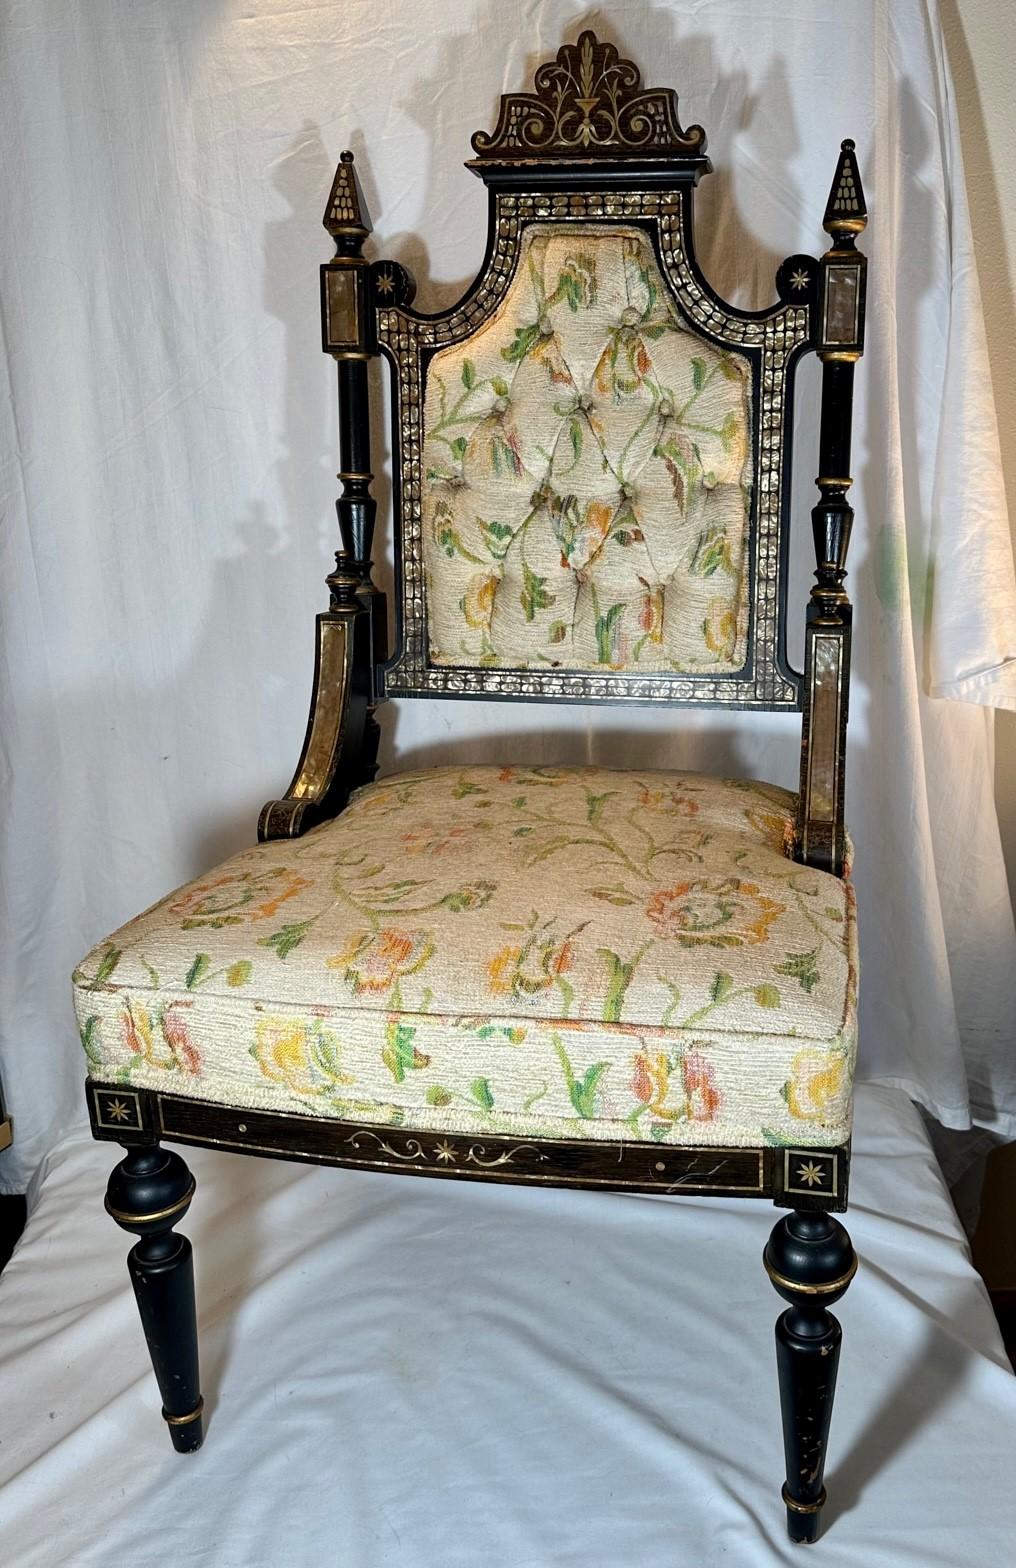 Mid Victorian Ebonized Chair with Mother of Pearl Inlay.

Rare antique Mother of Pearl inlaid side chair. The ebonized and gold decorated wood is carved and turned with fine details. The Mid Victorian chair originated probably from Armenia. It is